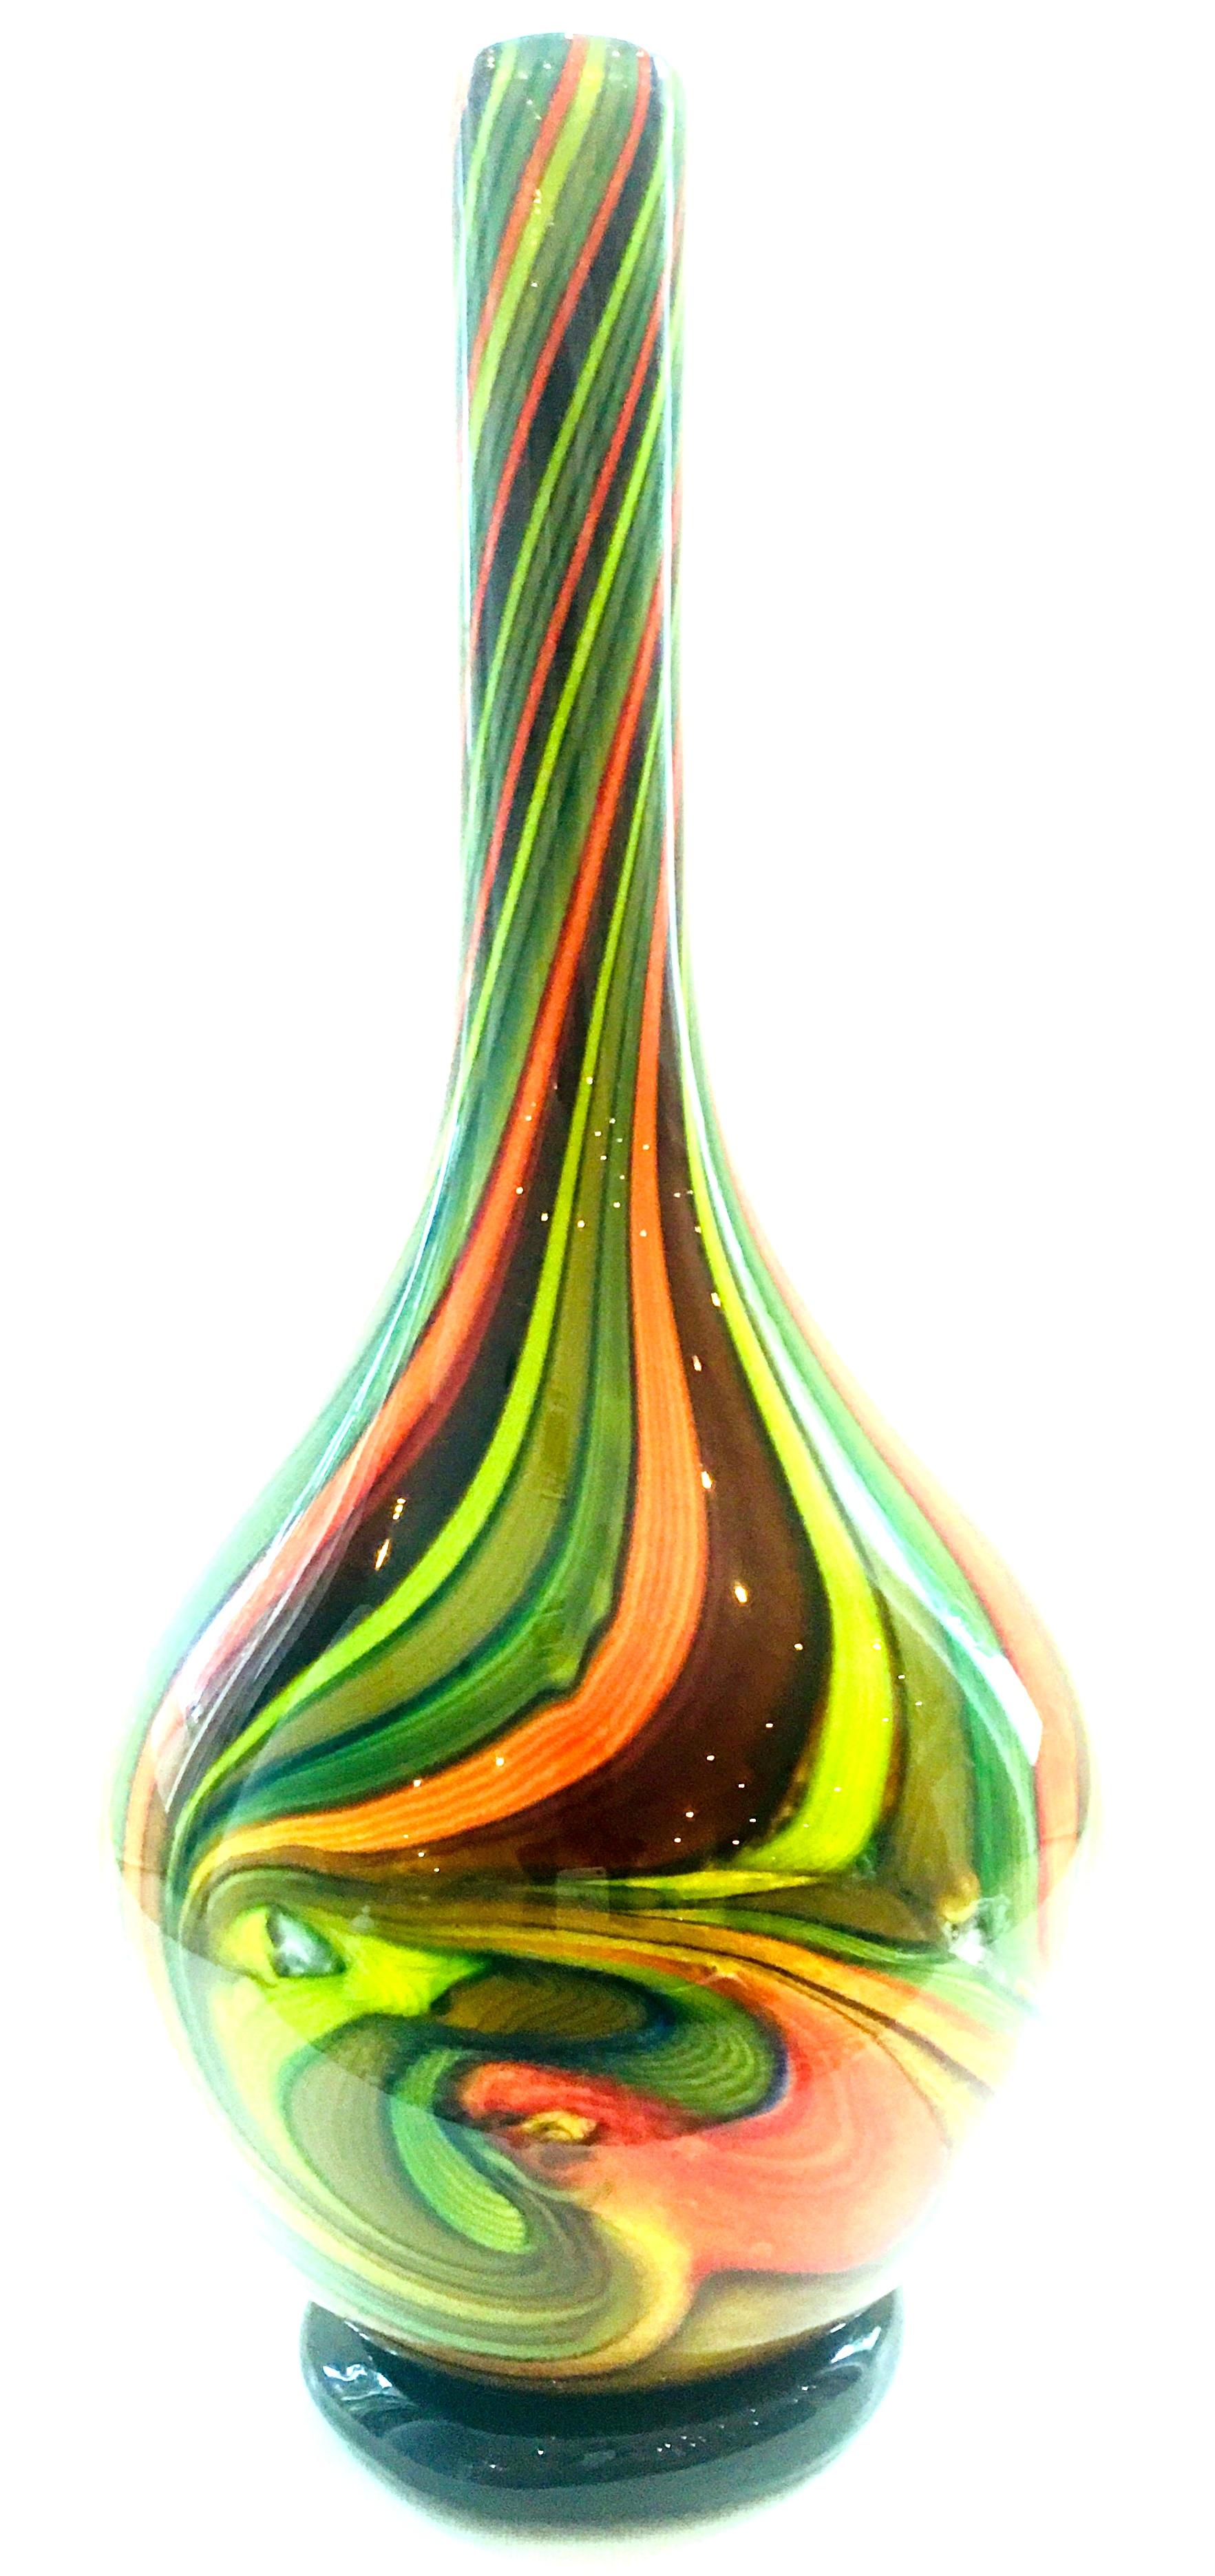 20th century blown glass cased art glass striped vase. One of a kind Murano style cased art glass vase. Features a stripe and swirl motif of vibrant greens, orange, brown, white and blue with black base.